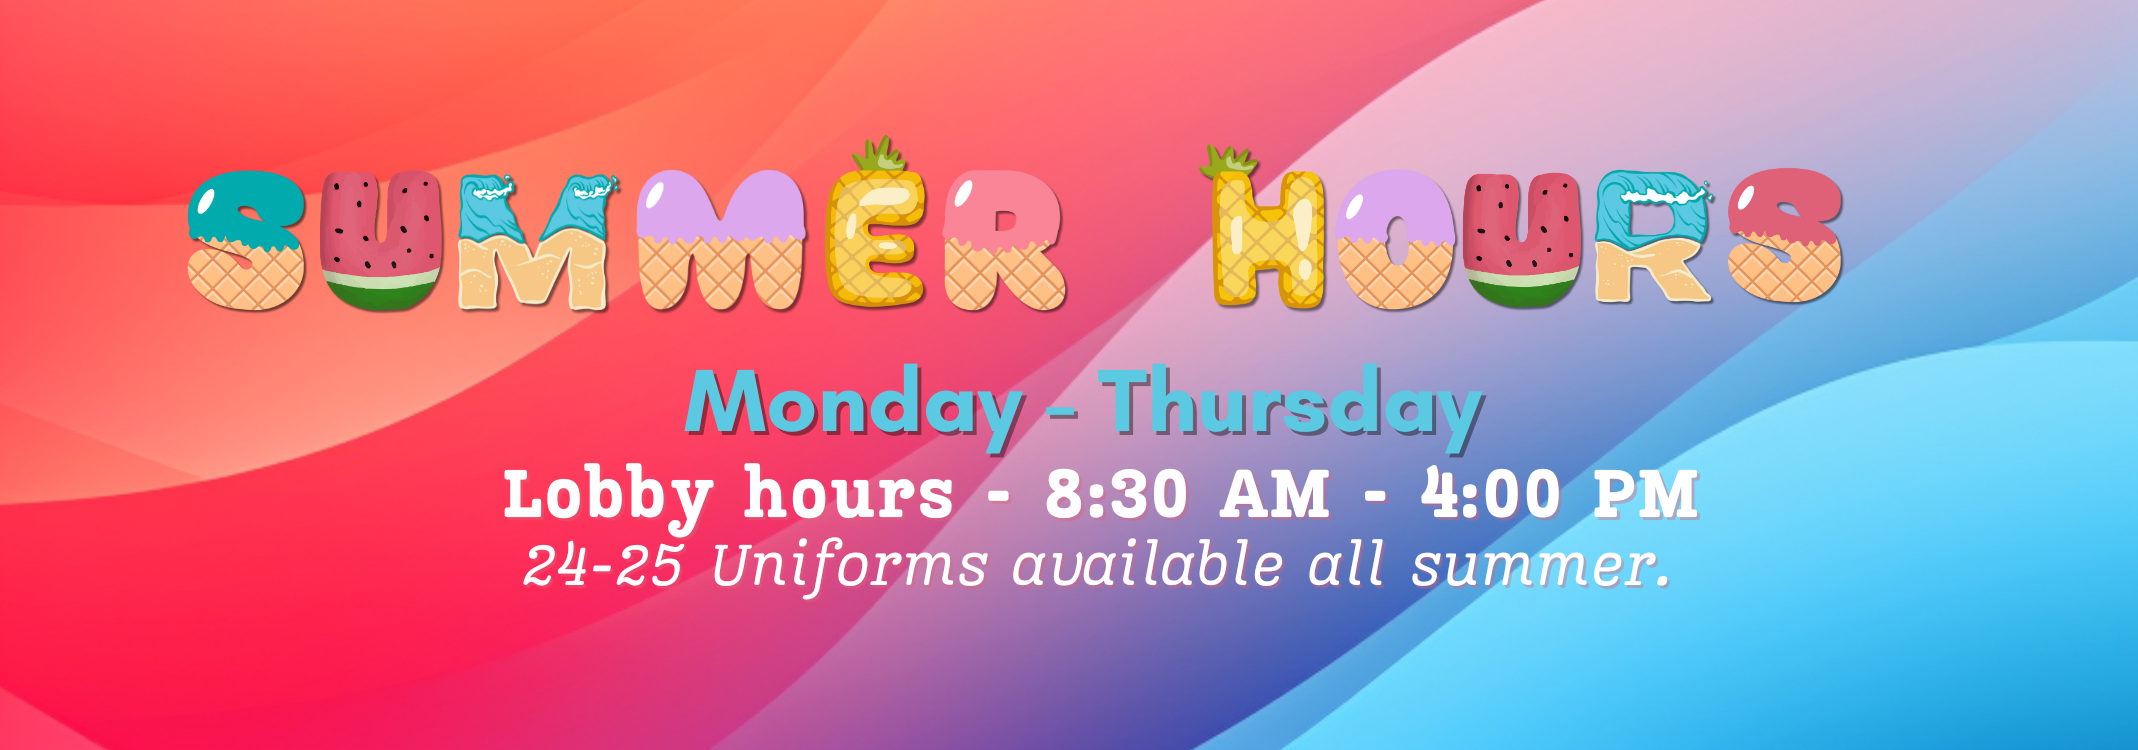 Summer office hours: Monday through Thursday, 8:30 AM to 4:00 PM